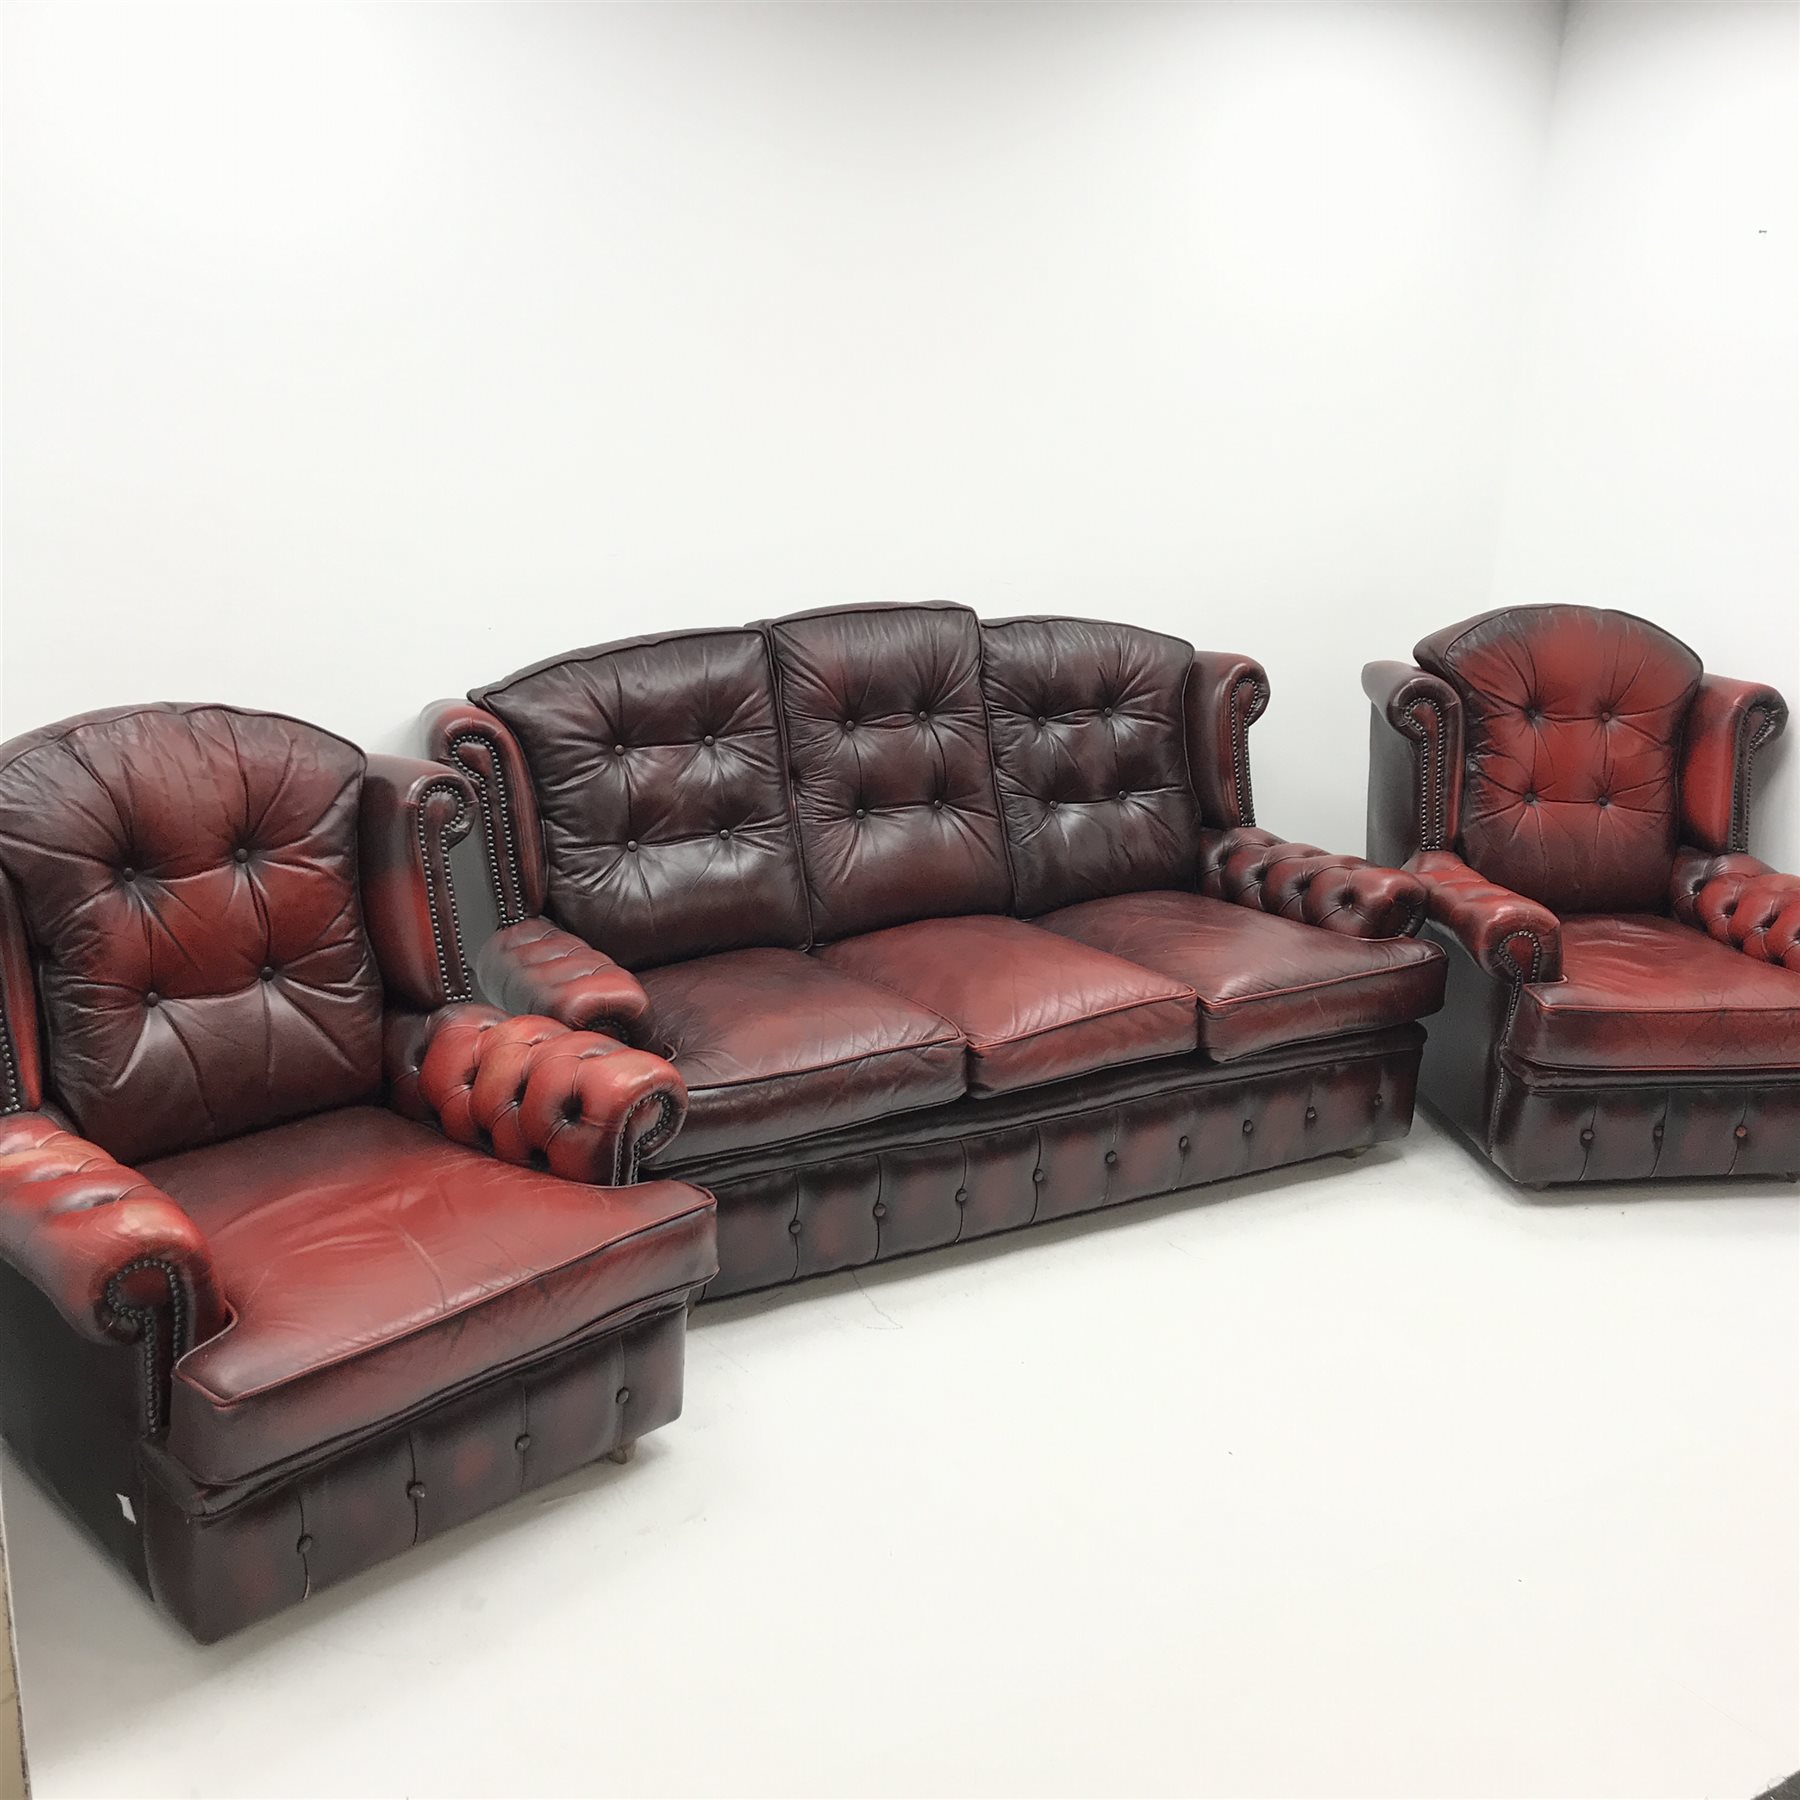 Georgian style three seat sofa upholstered in deep buttoned vintage red leather (W175cm) and pair of - Image 3 of 10